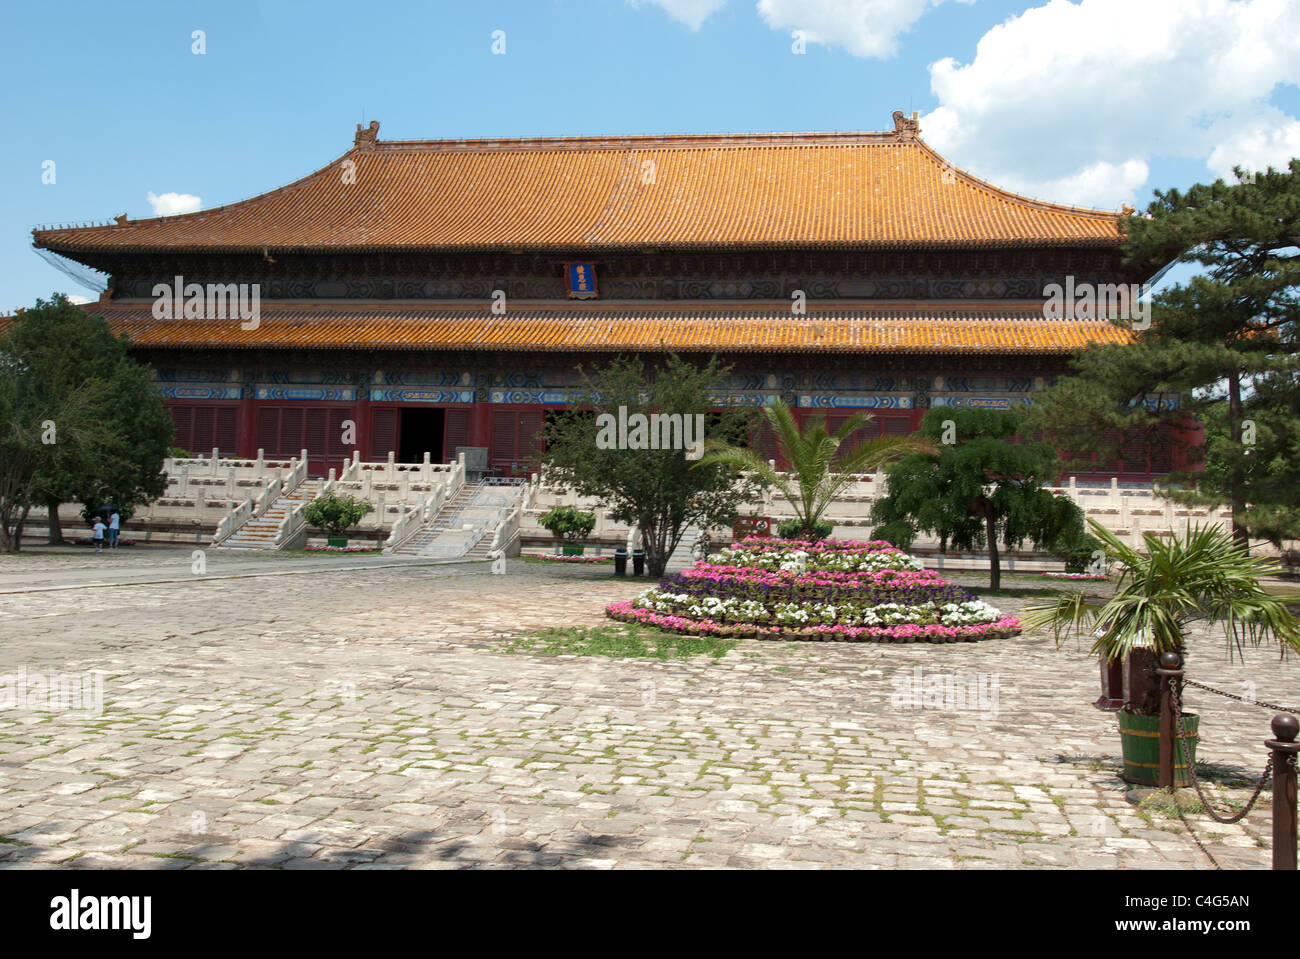 Entrance to the Ming Dynasty Tombs Stock Photo